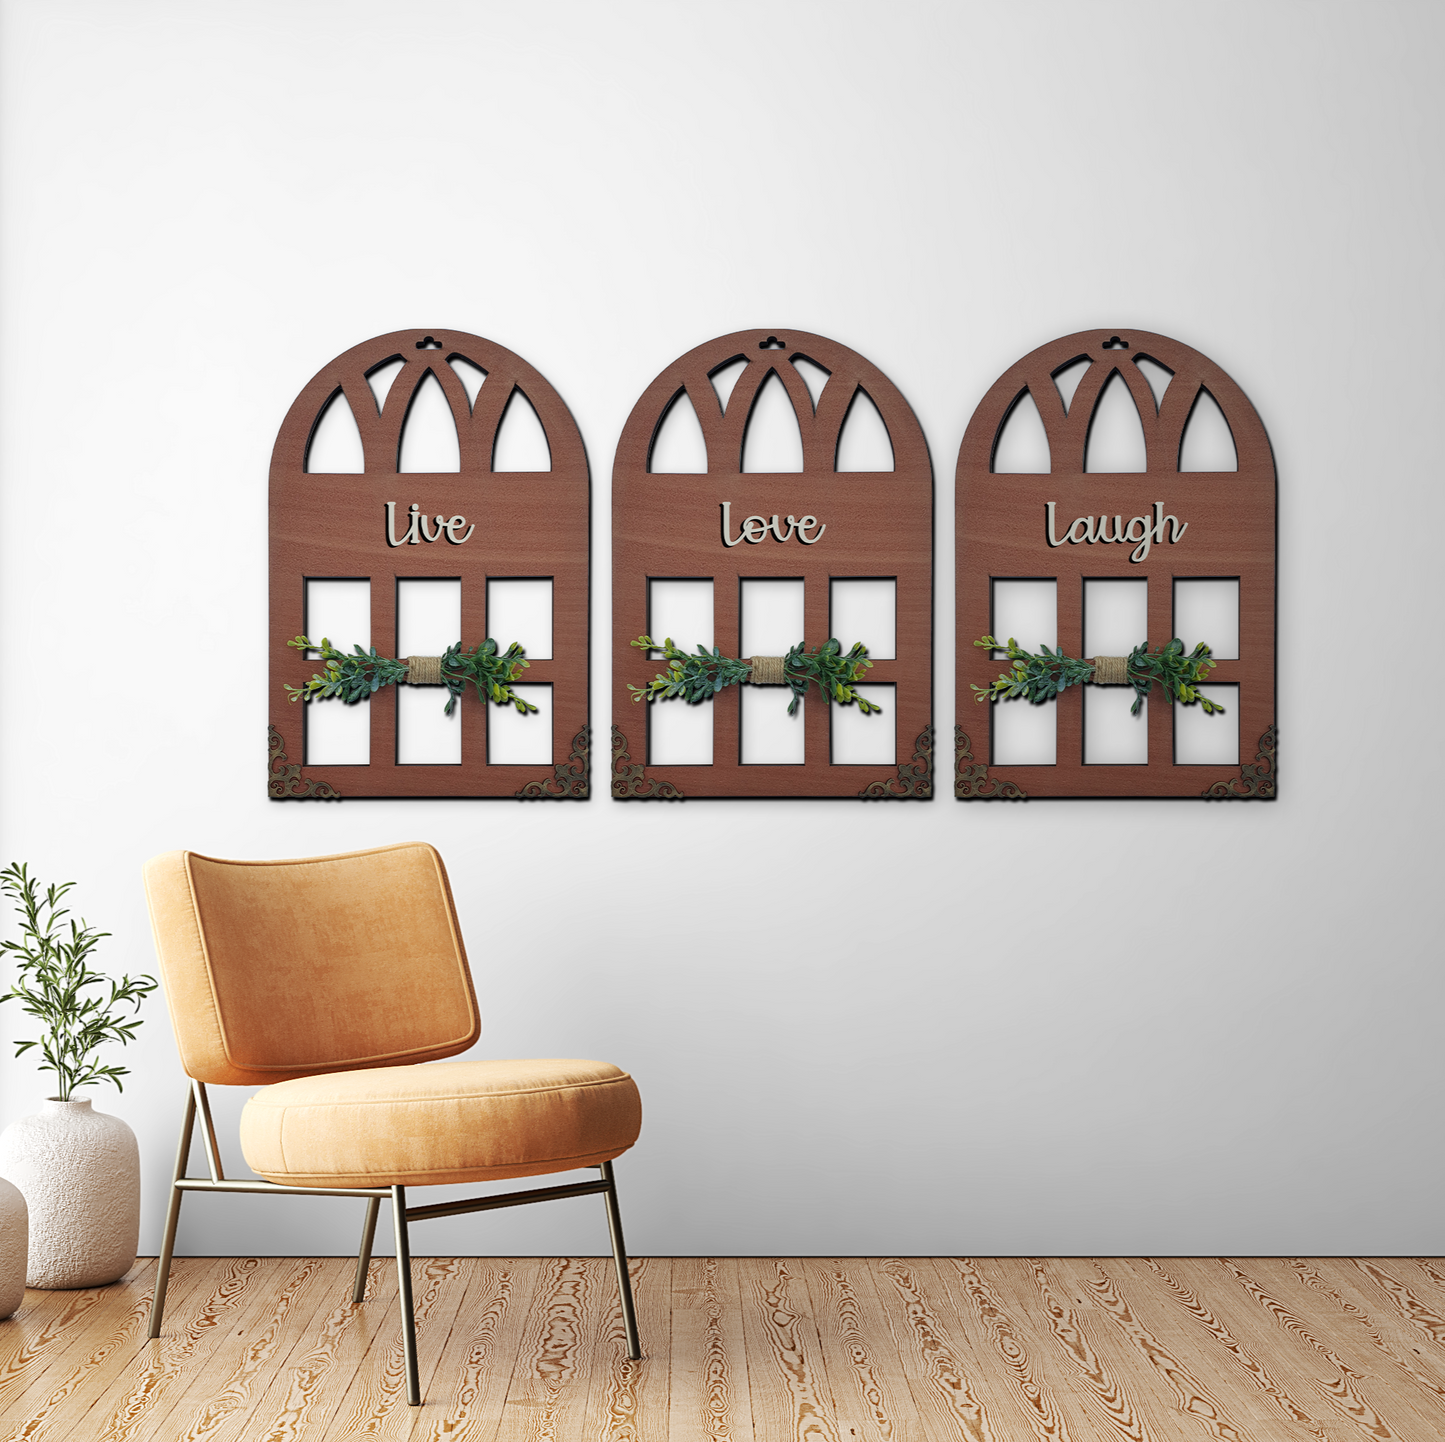 Good Vibes Only Quote Window Wall Art Set of 3